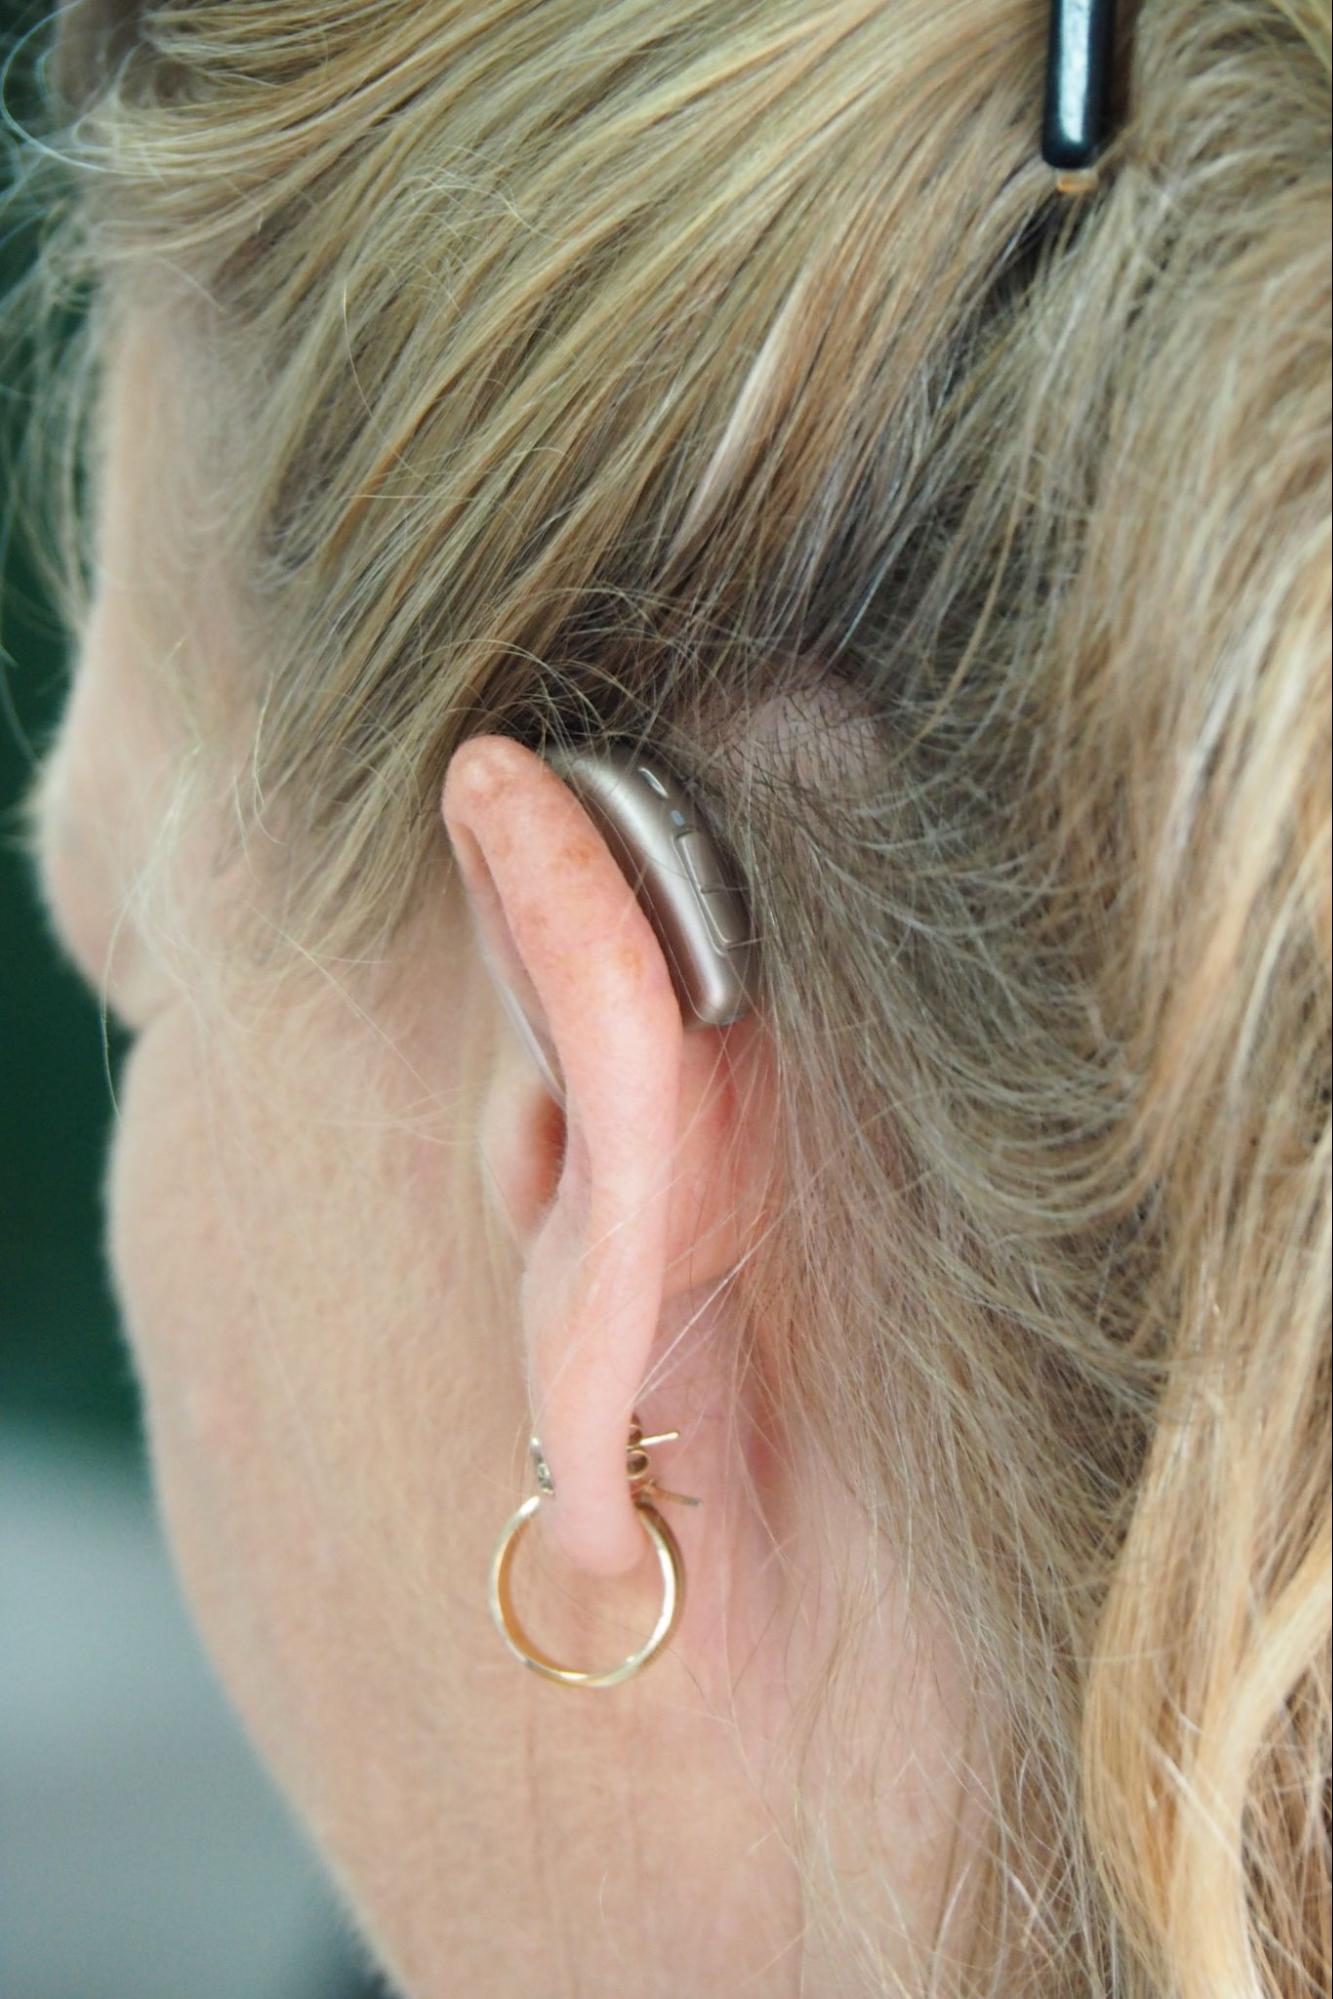 key hearing aid features